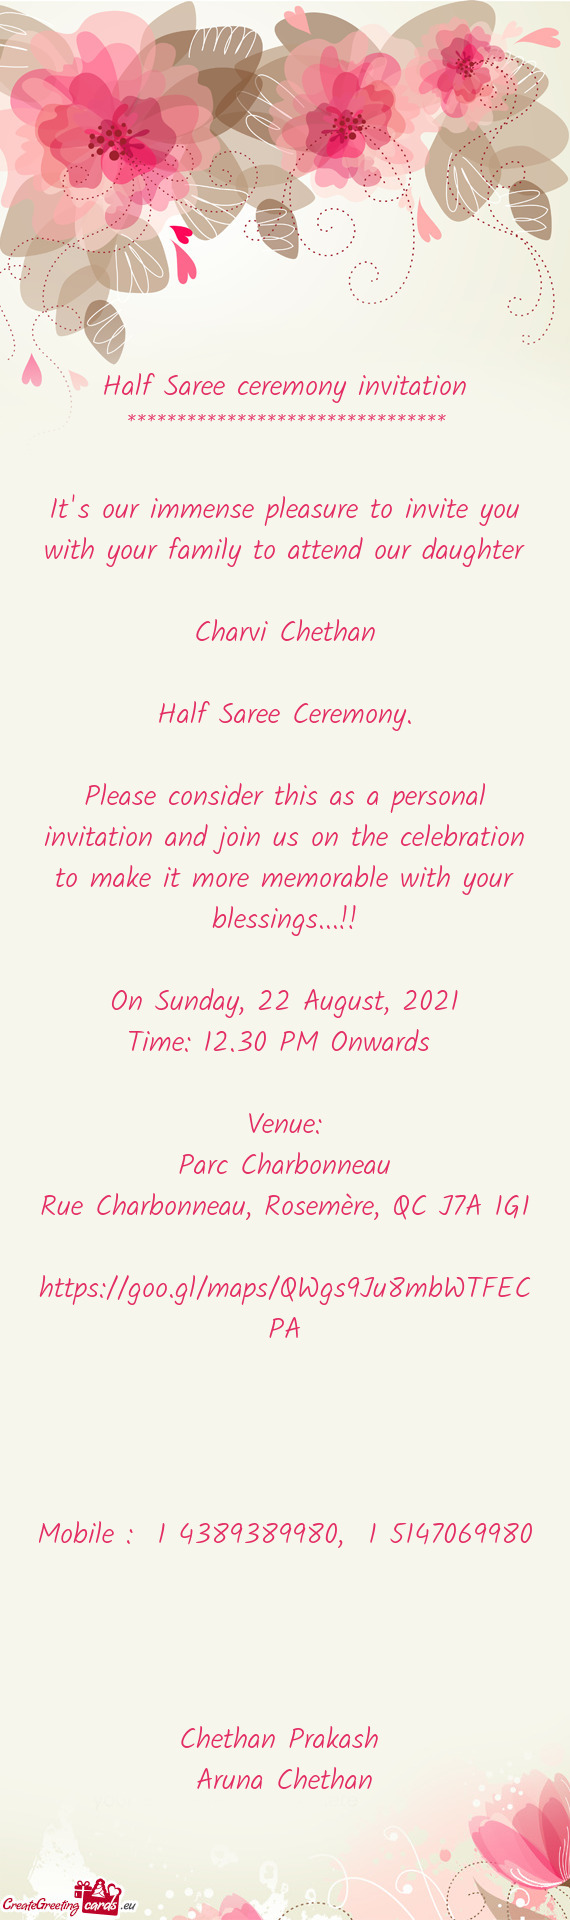 Please consider this as a personal invitation and join us on the celebration to make it more mem